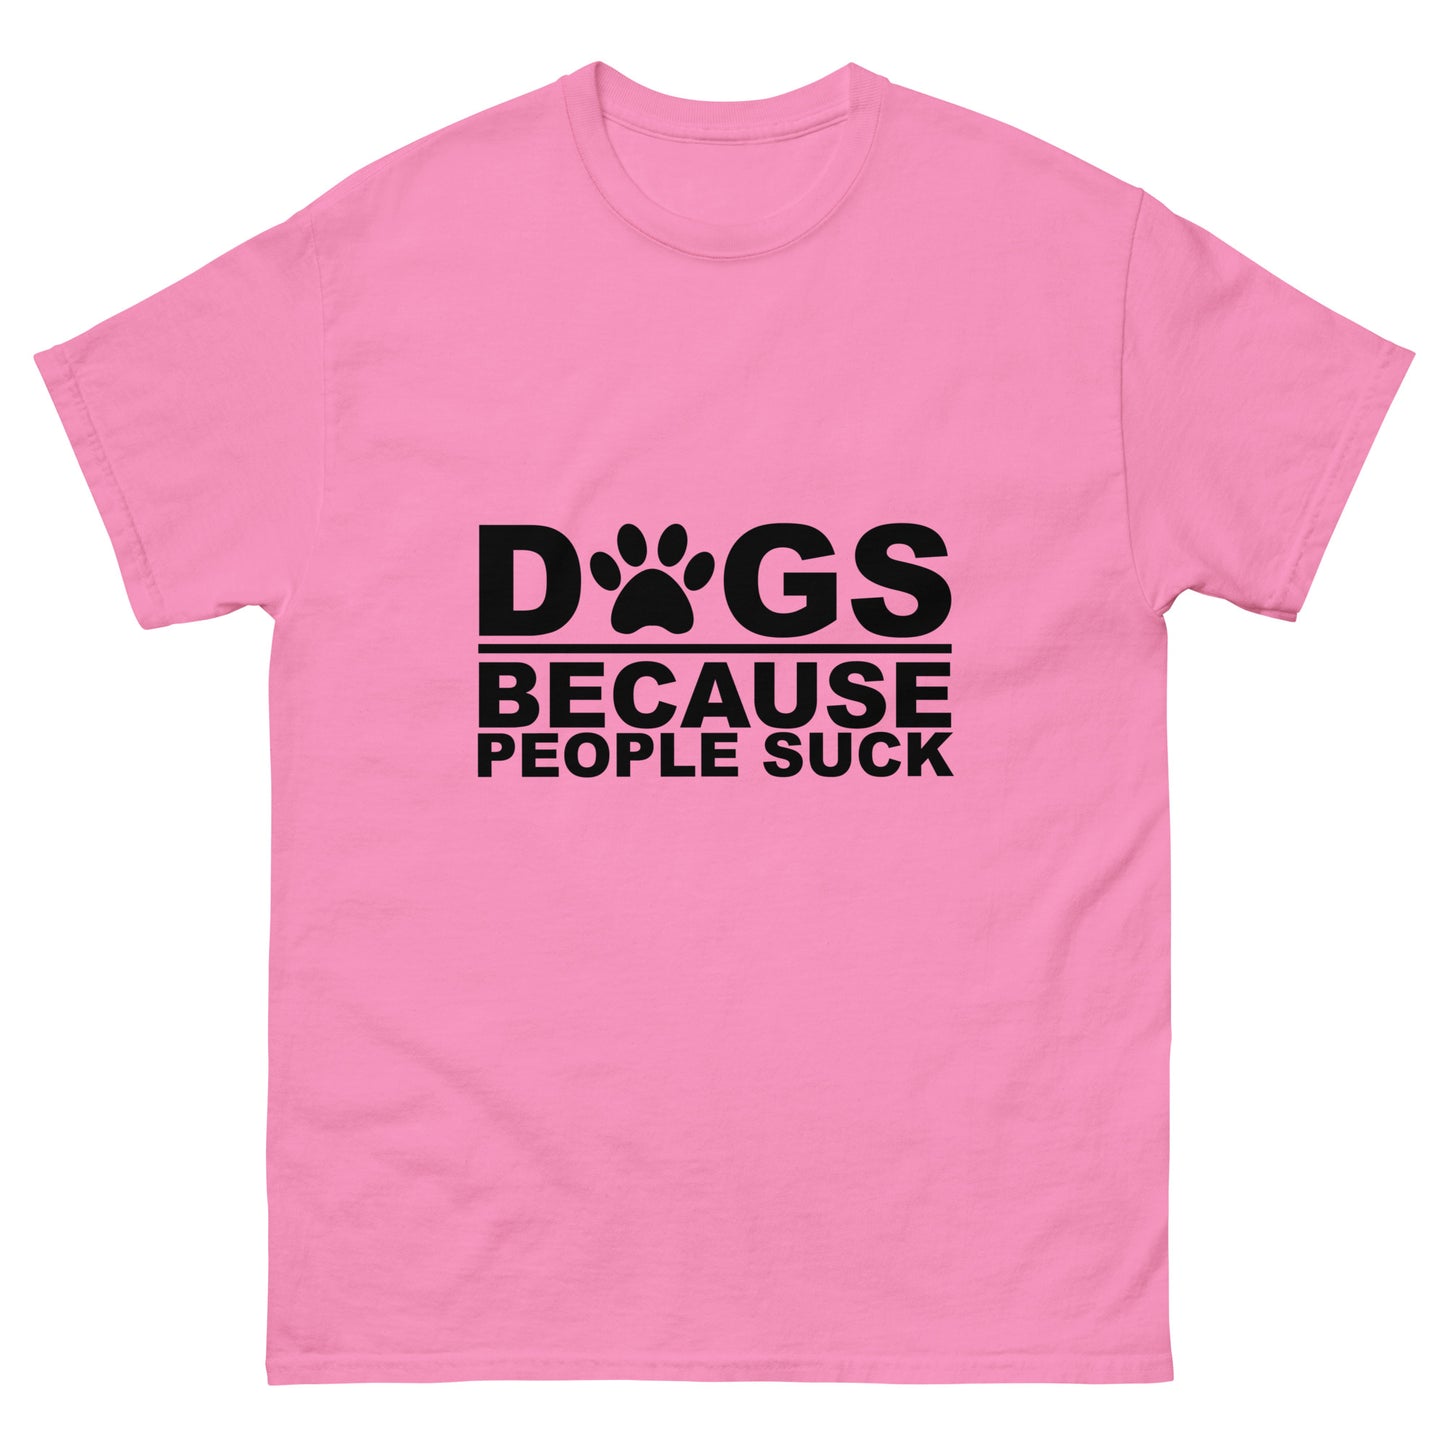 Dogs Because People Suck - classic tee